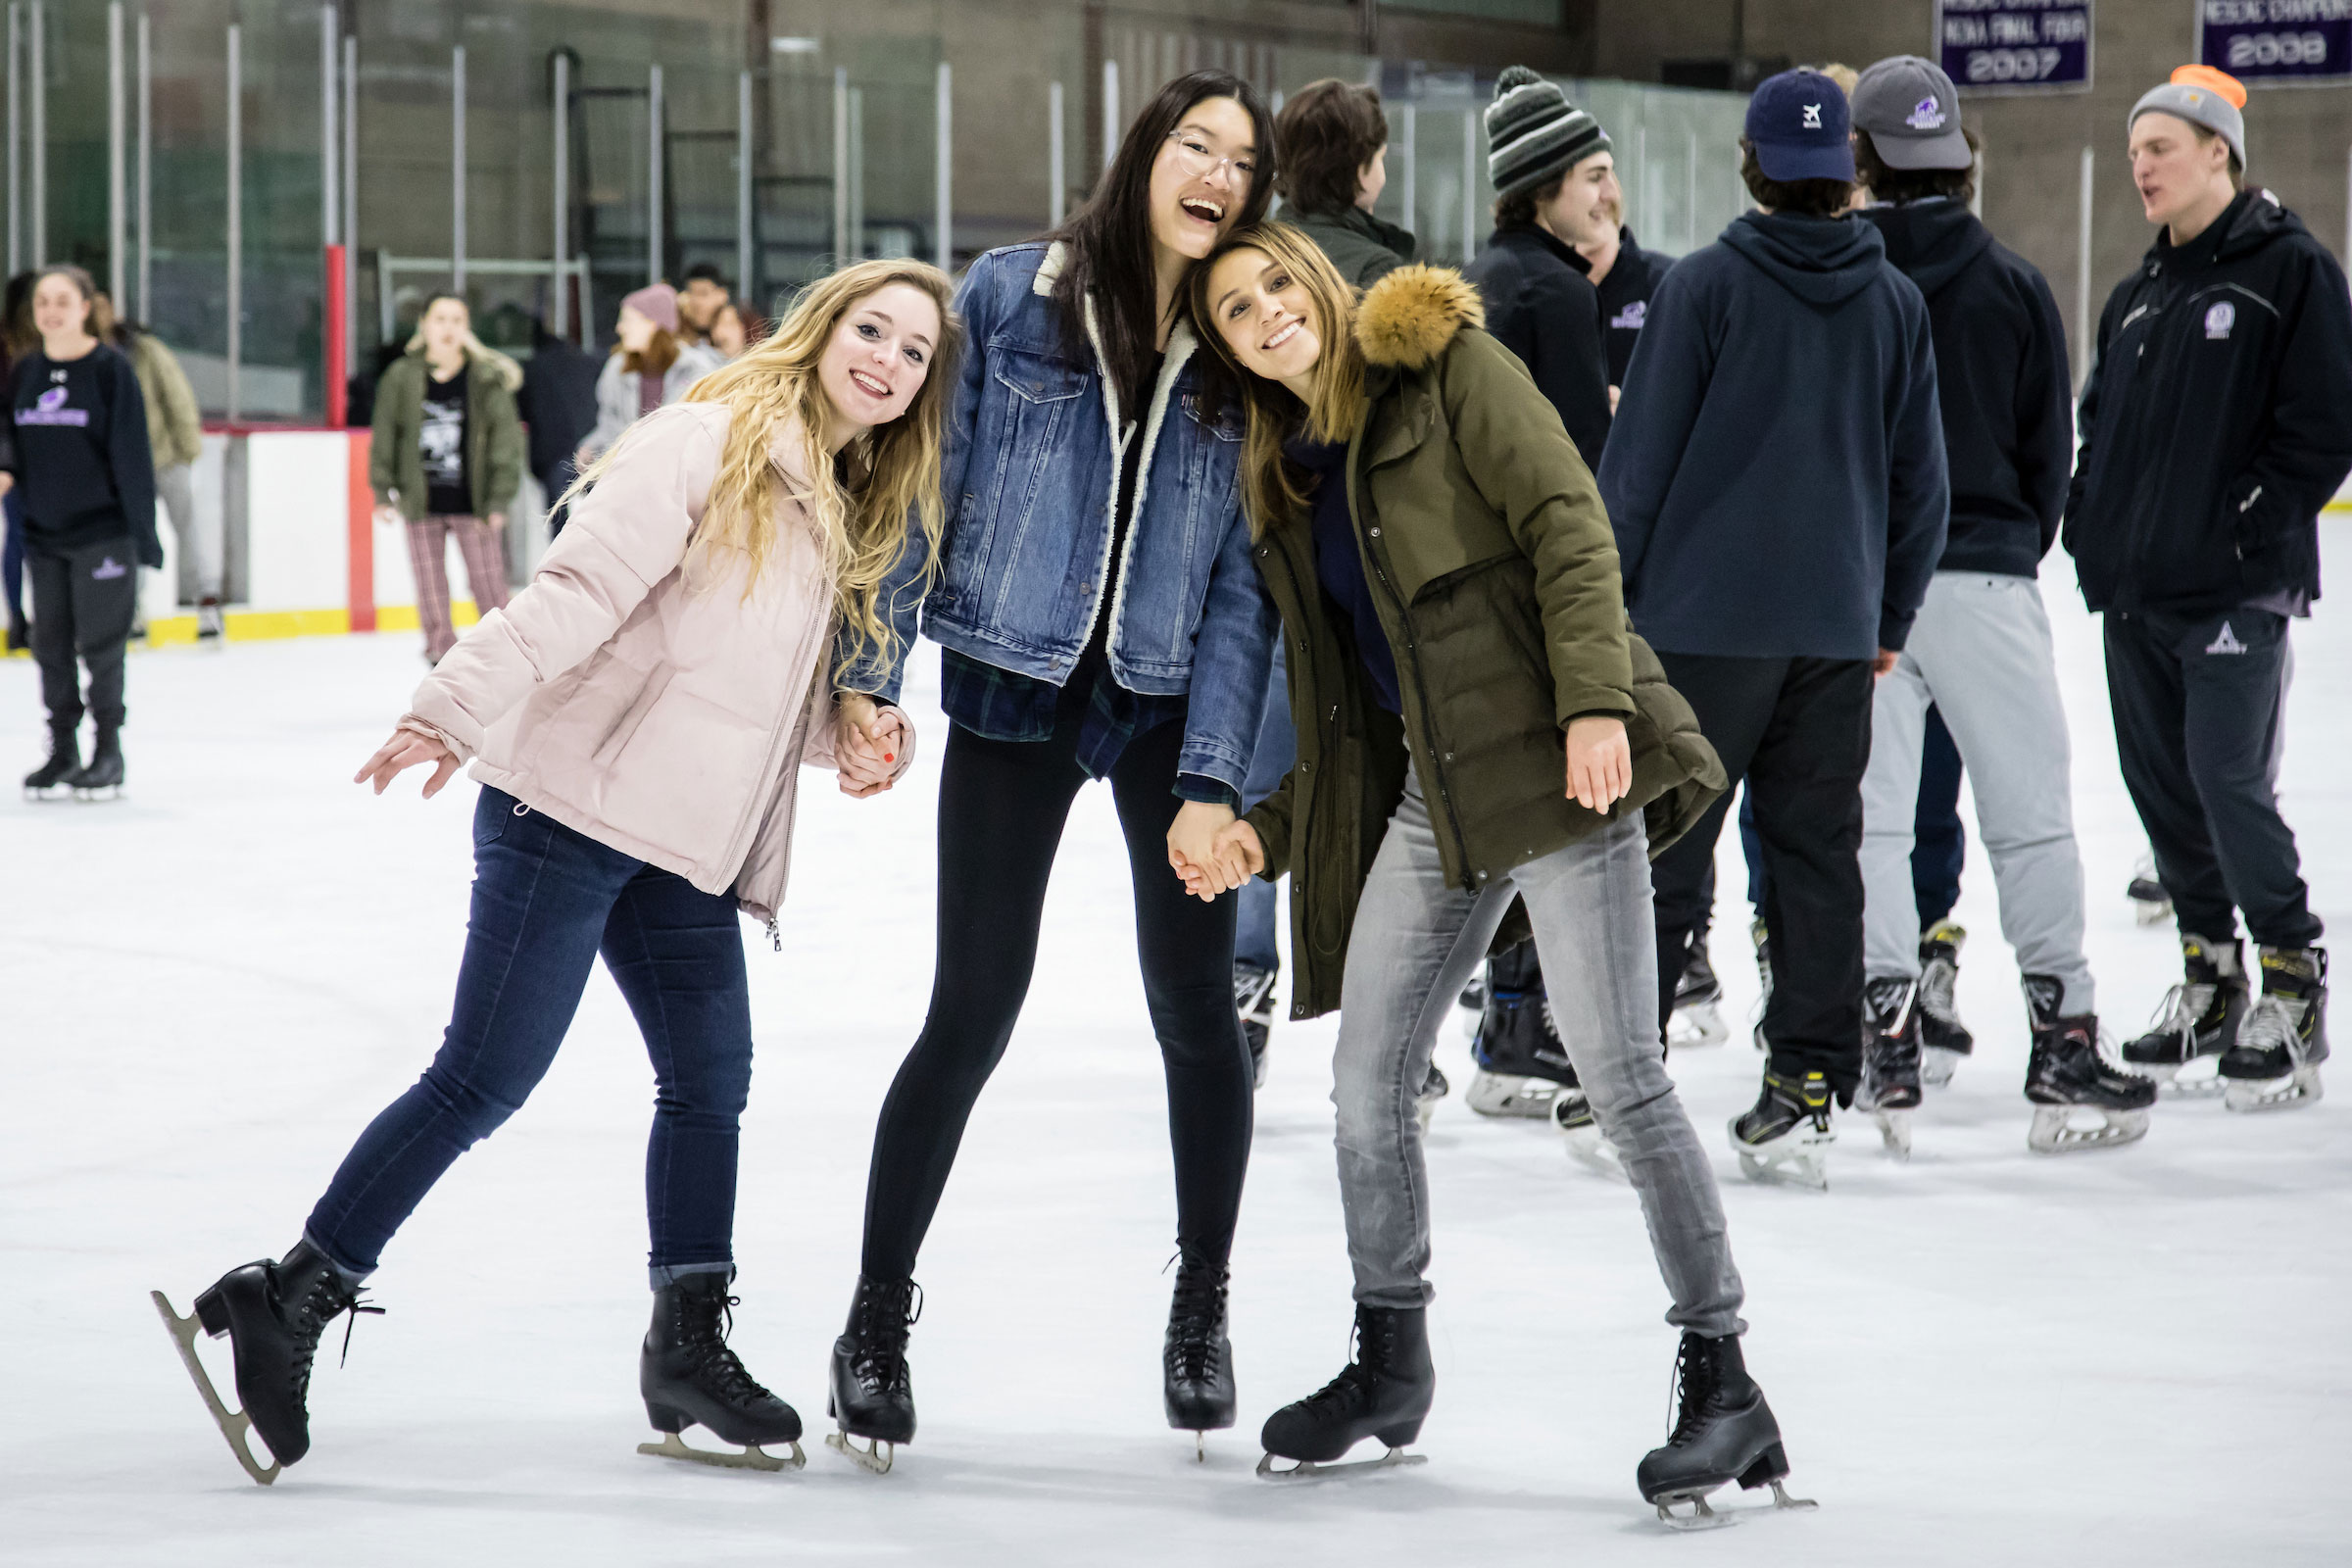 Three women pose together on the ice skating rink